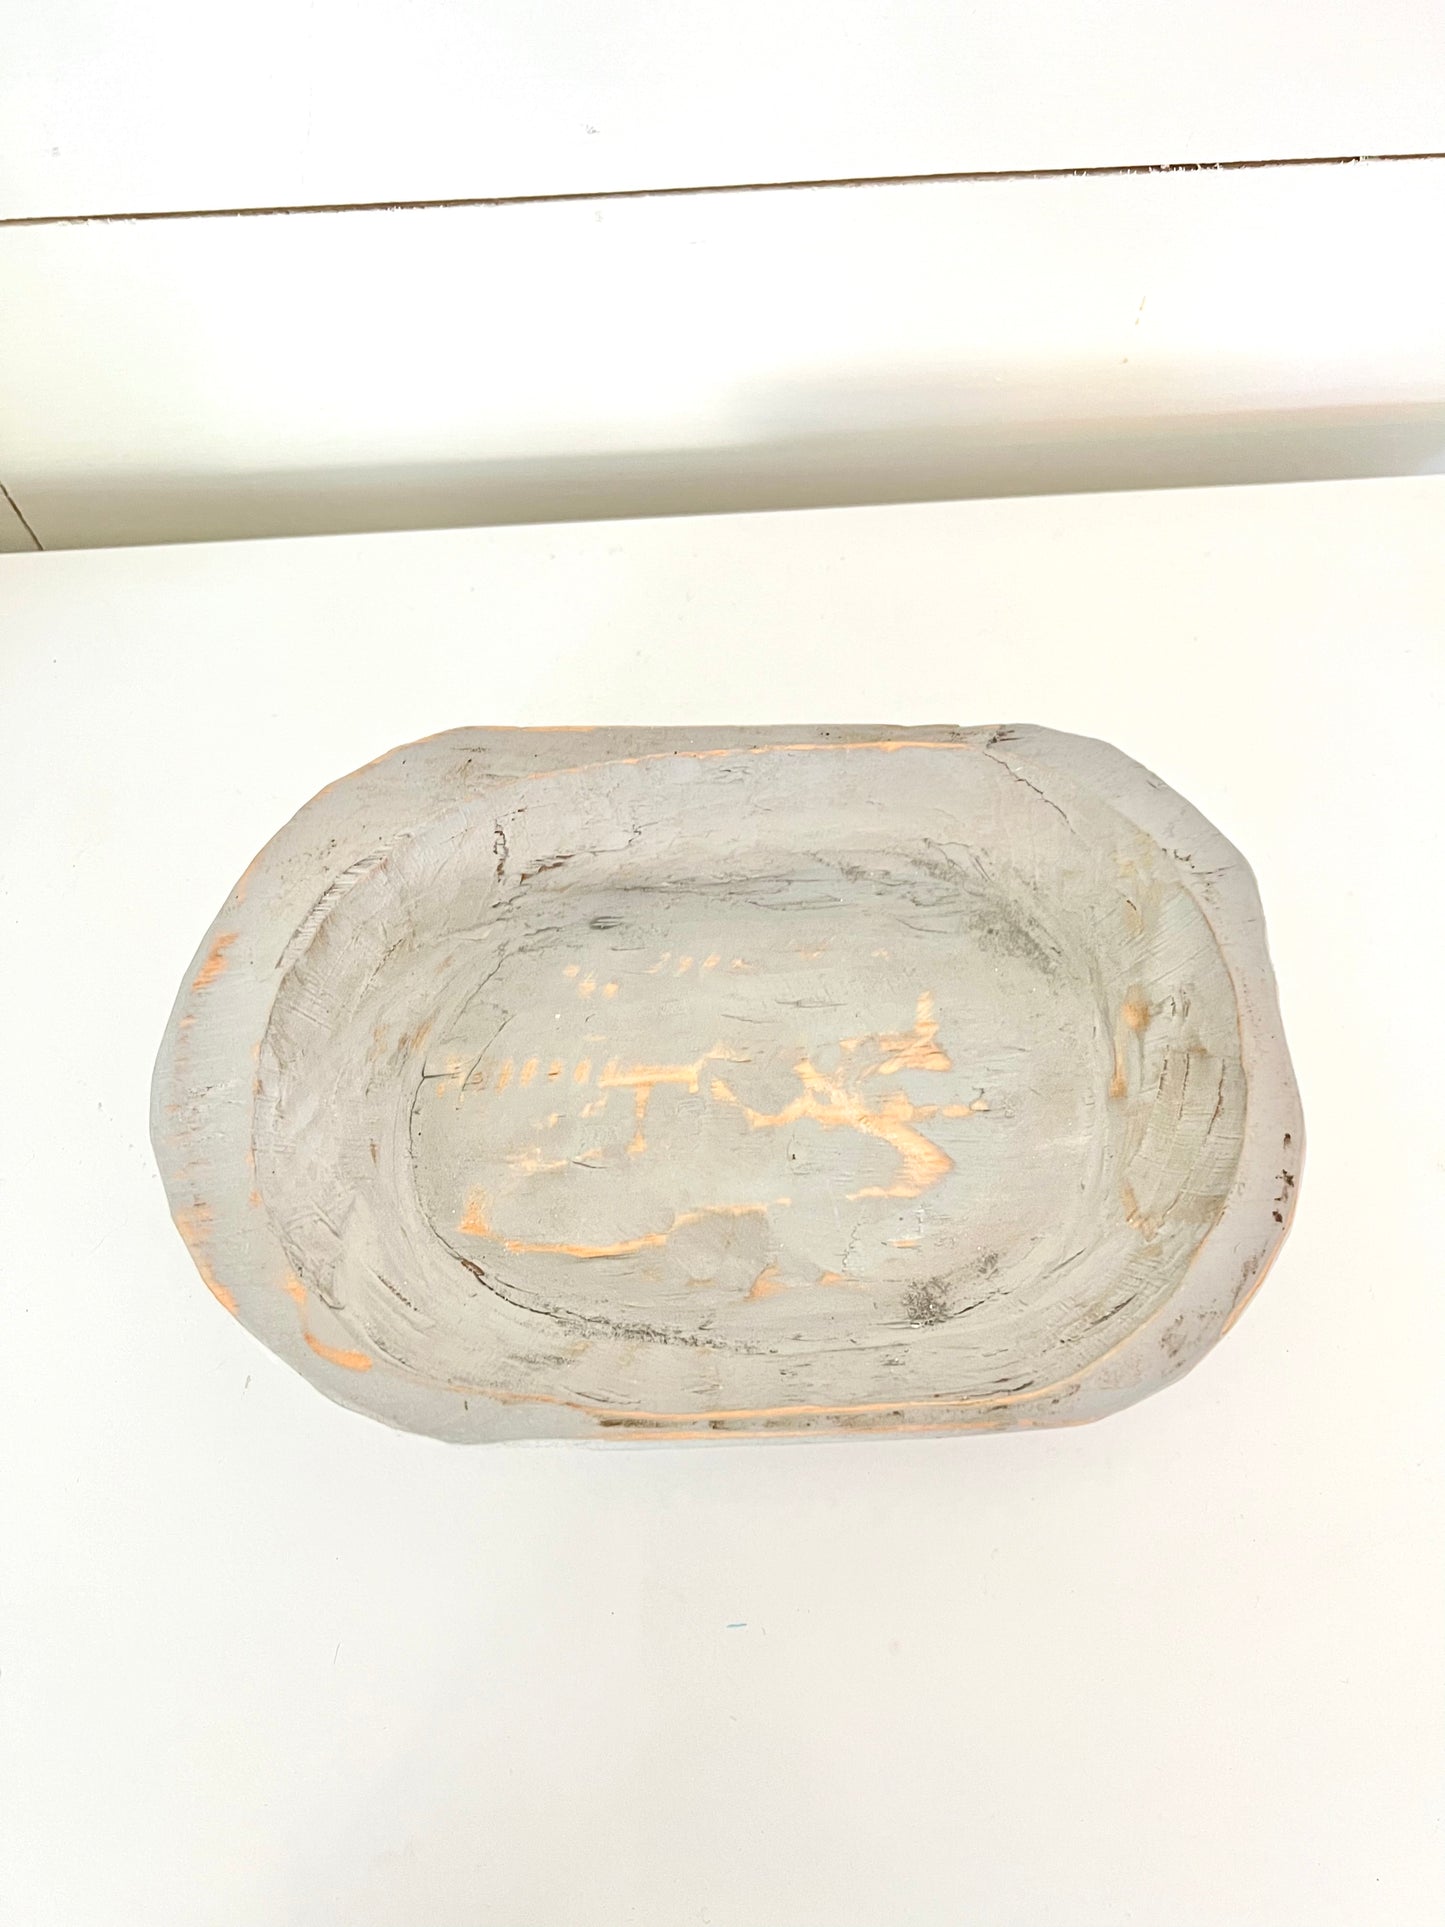 Pastel blue or gray small wooden dough bowl